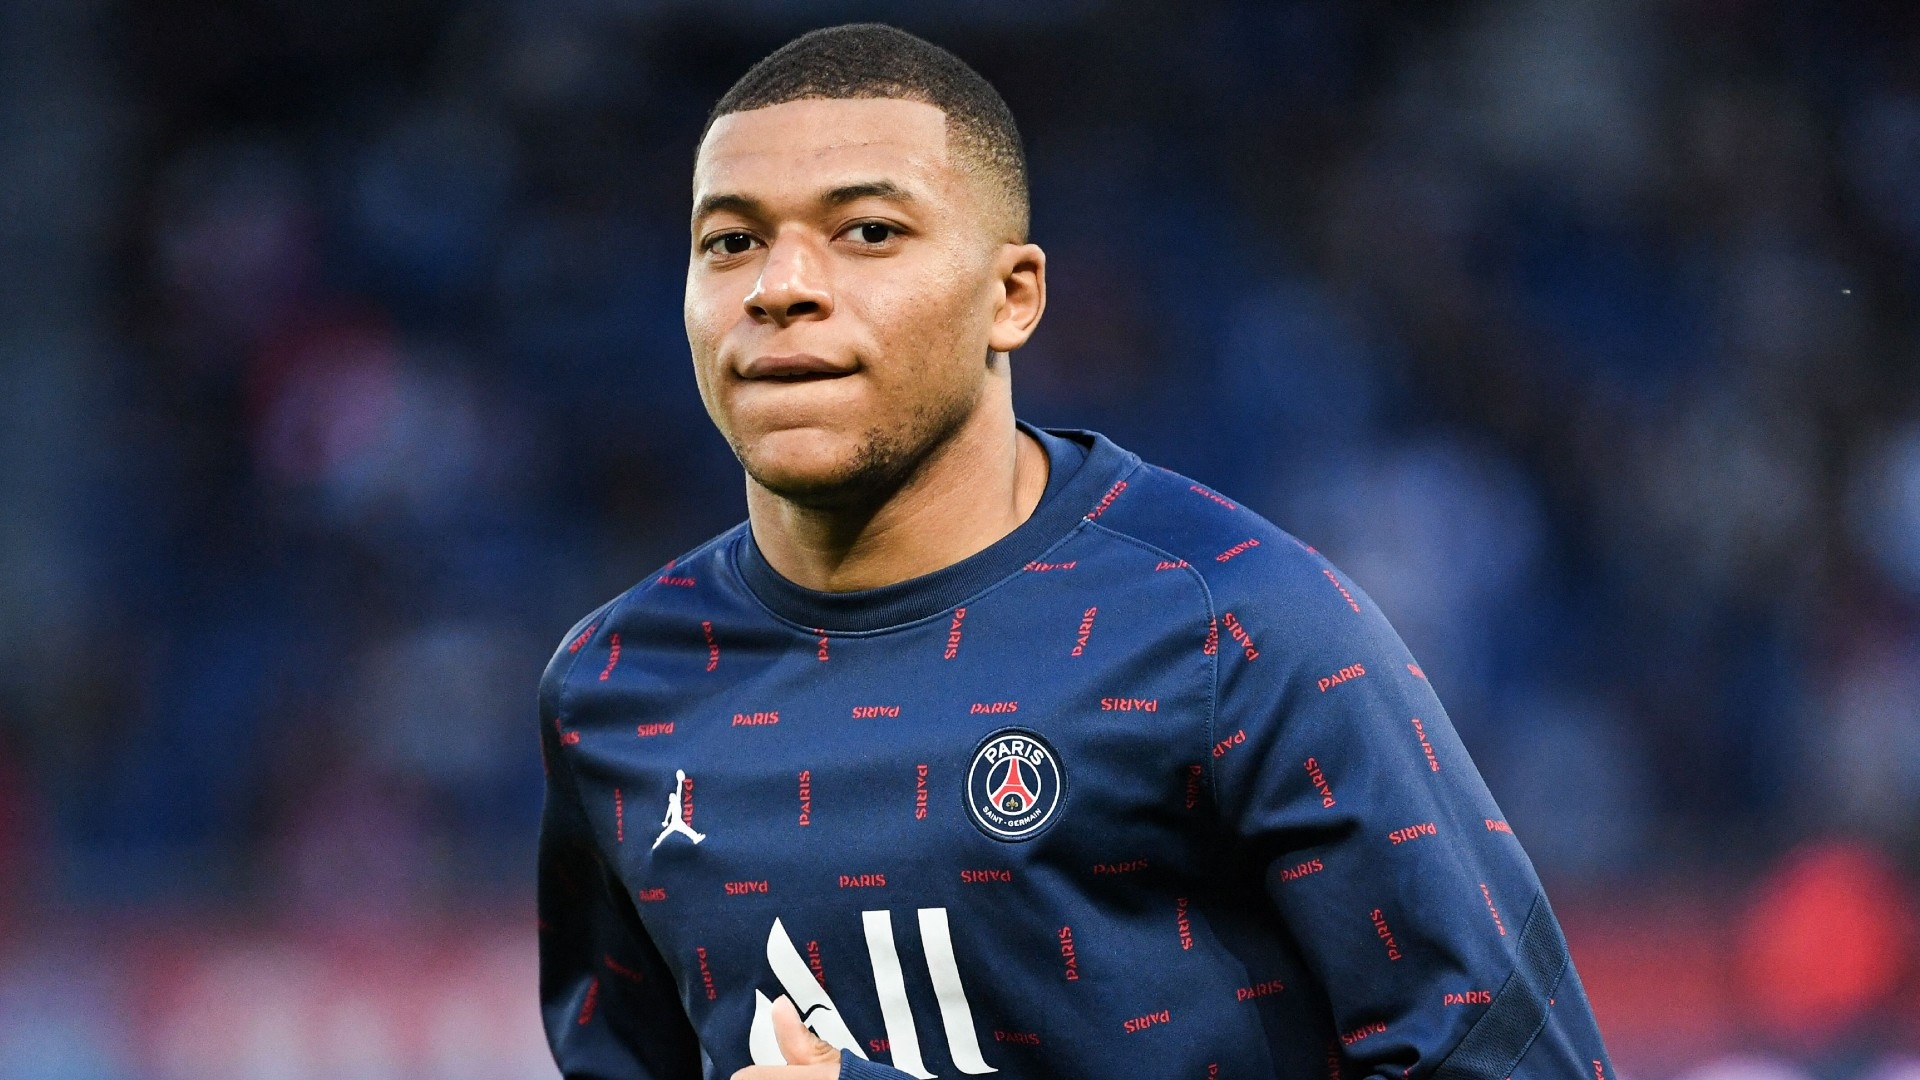 Mbappe agrees Real Madrid terms and transfer for PSG star to be announced after Champions League final